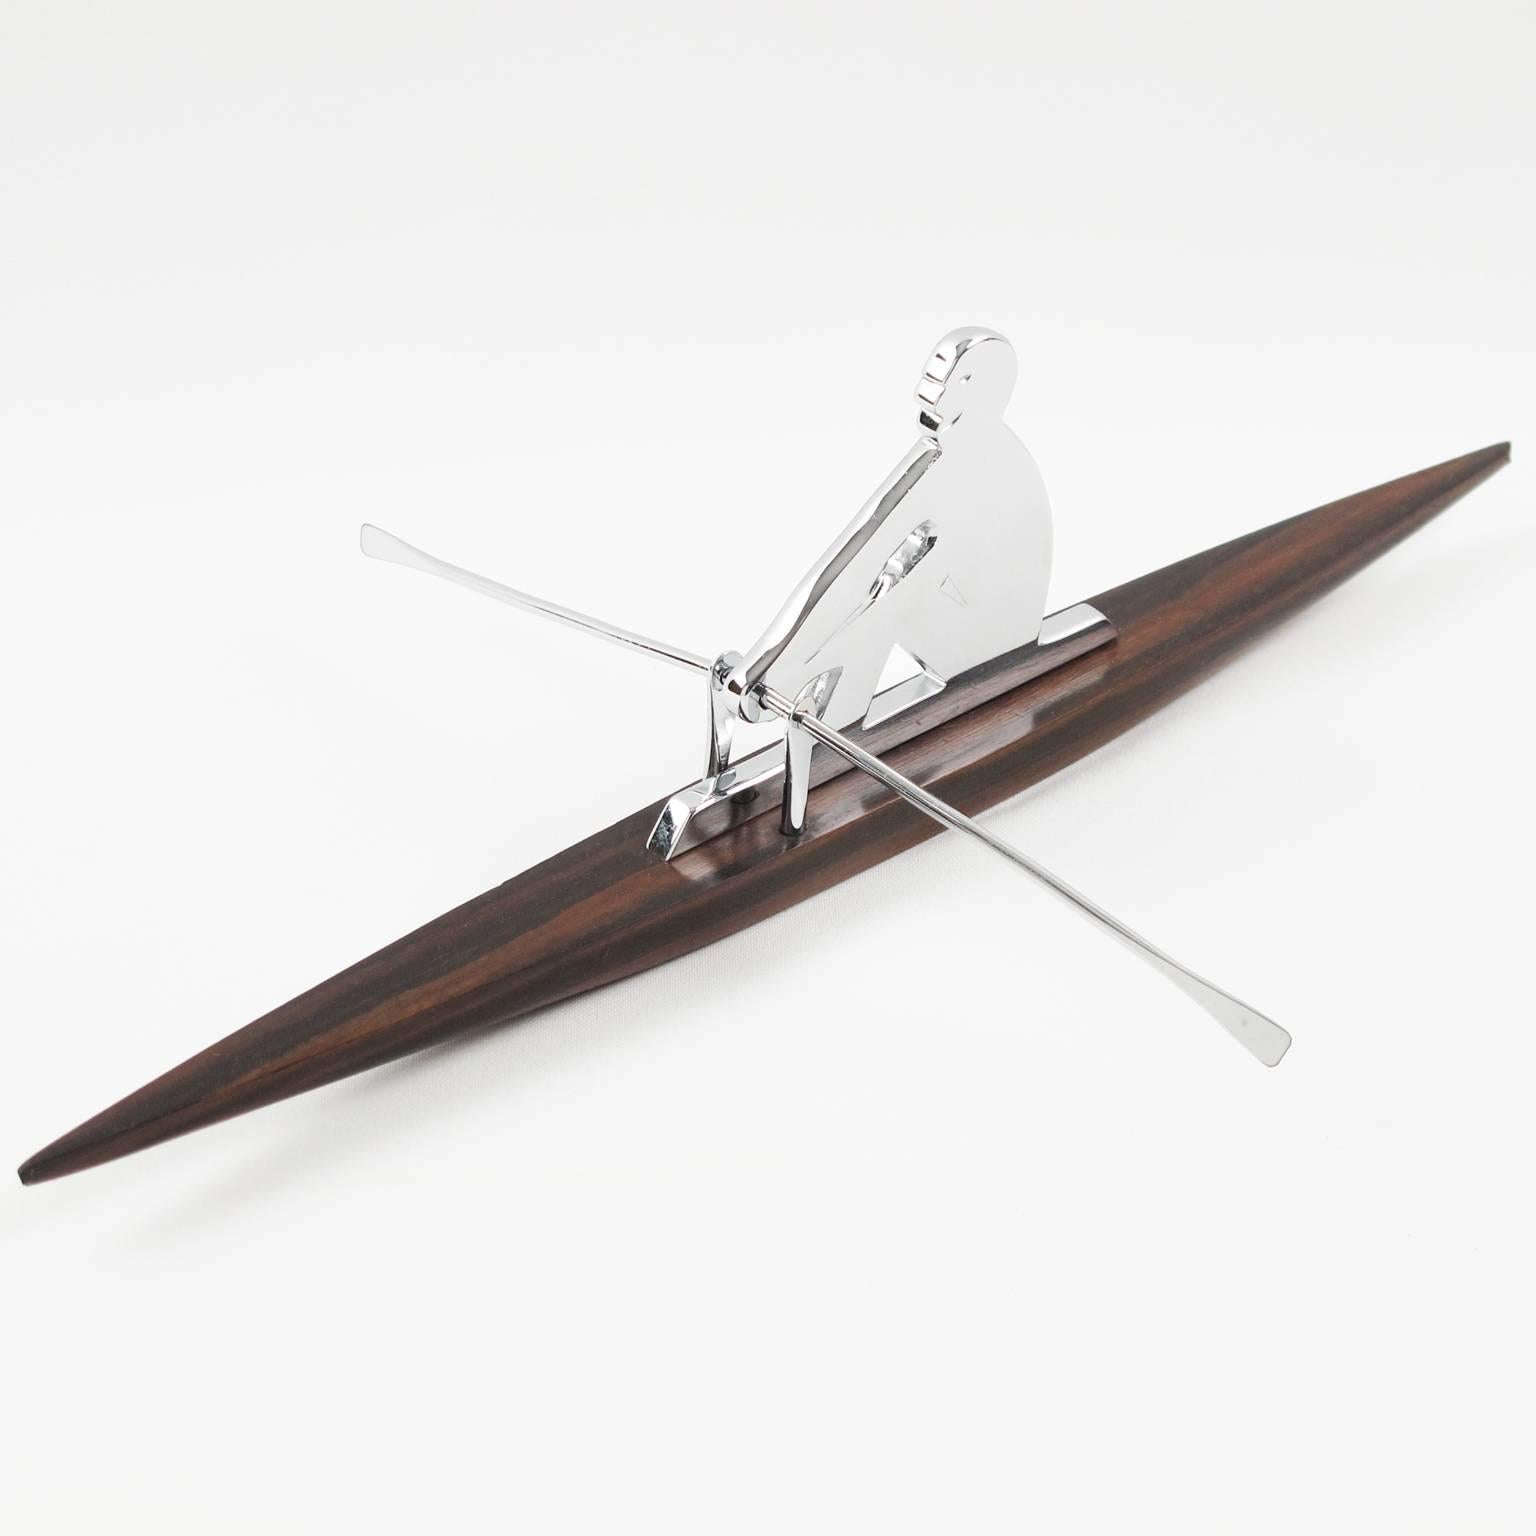 Unusual vintage French Art Deco elegant sculpture model. Featuring a curiosity rower with boat in Macassar wood, chrome-plated flat sport figurine and oars. Stamped 